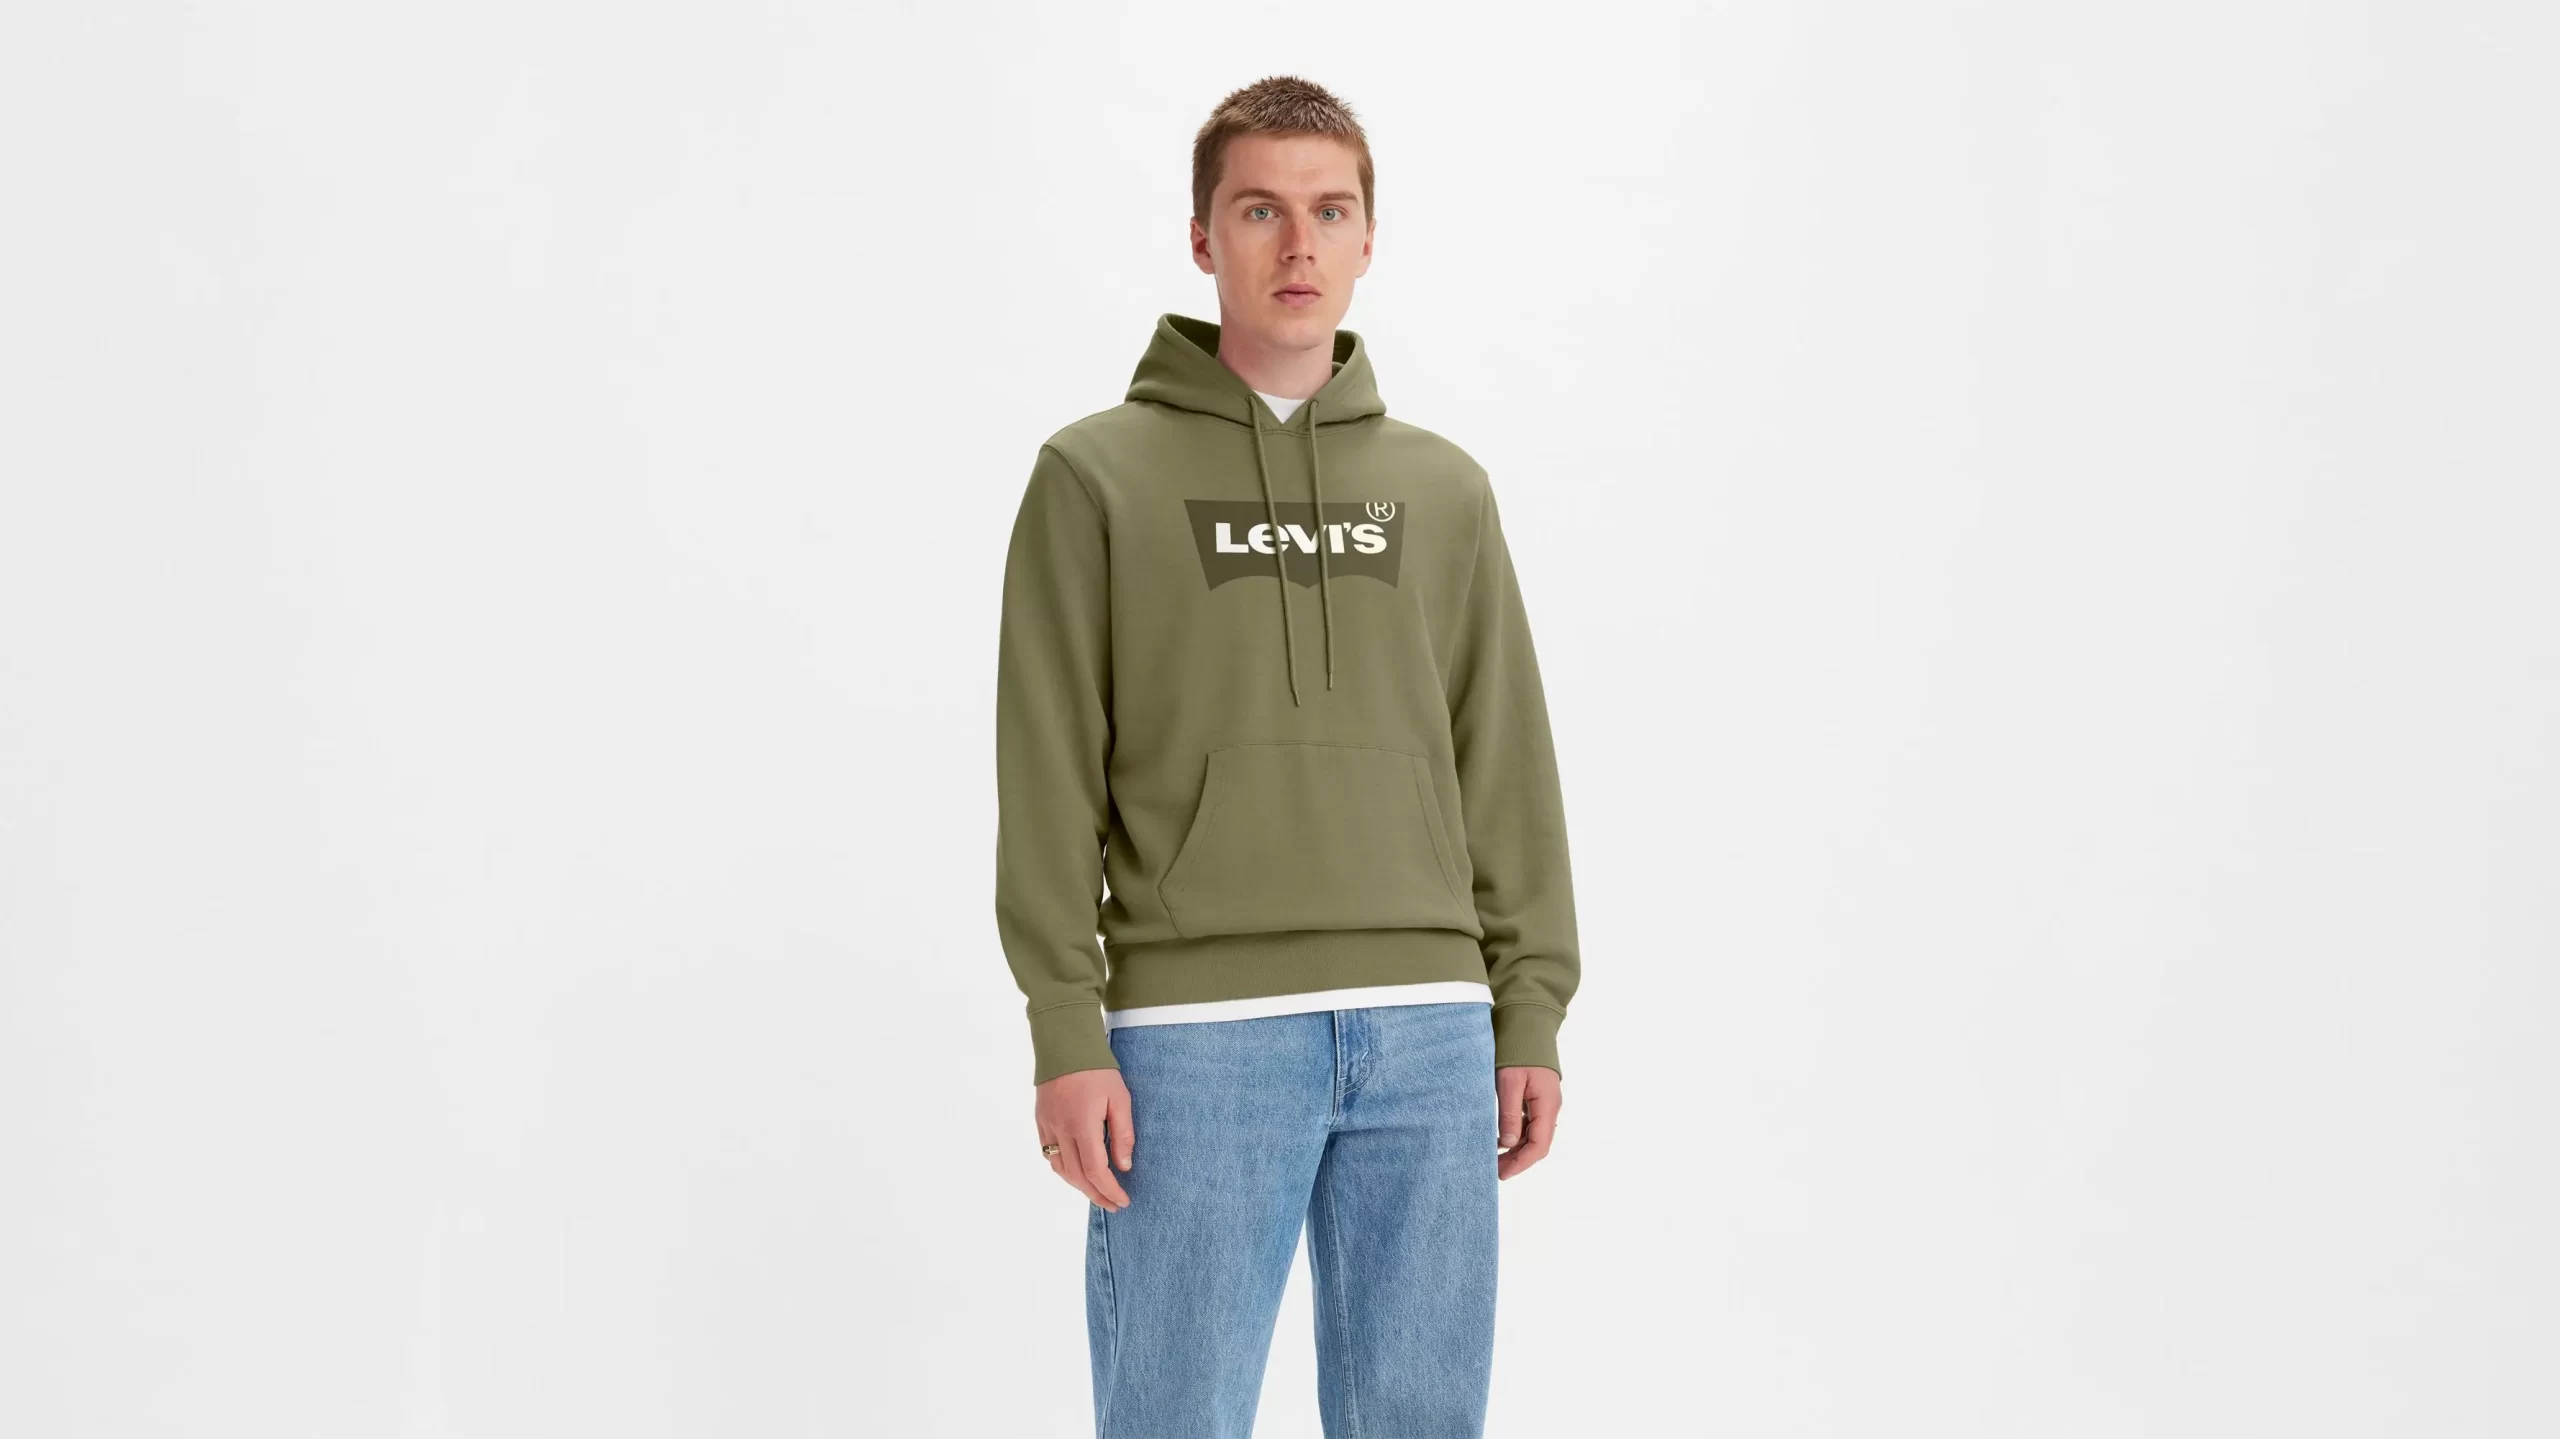 Levi's Standard Graphic Hood Man Olive Green Sweatshirt with Hood  38424-0019 - Barbopoulos store, Chania